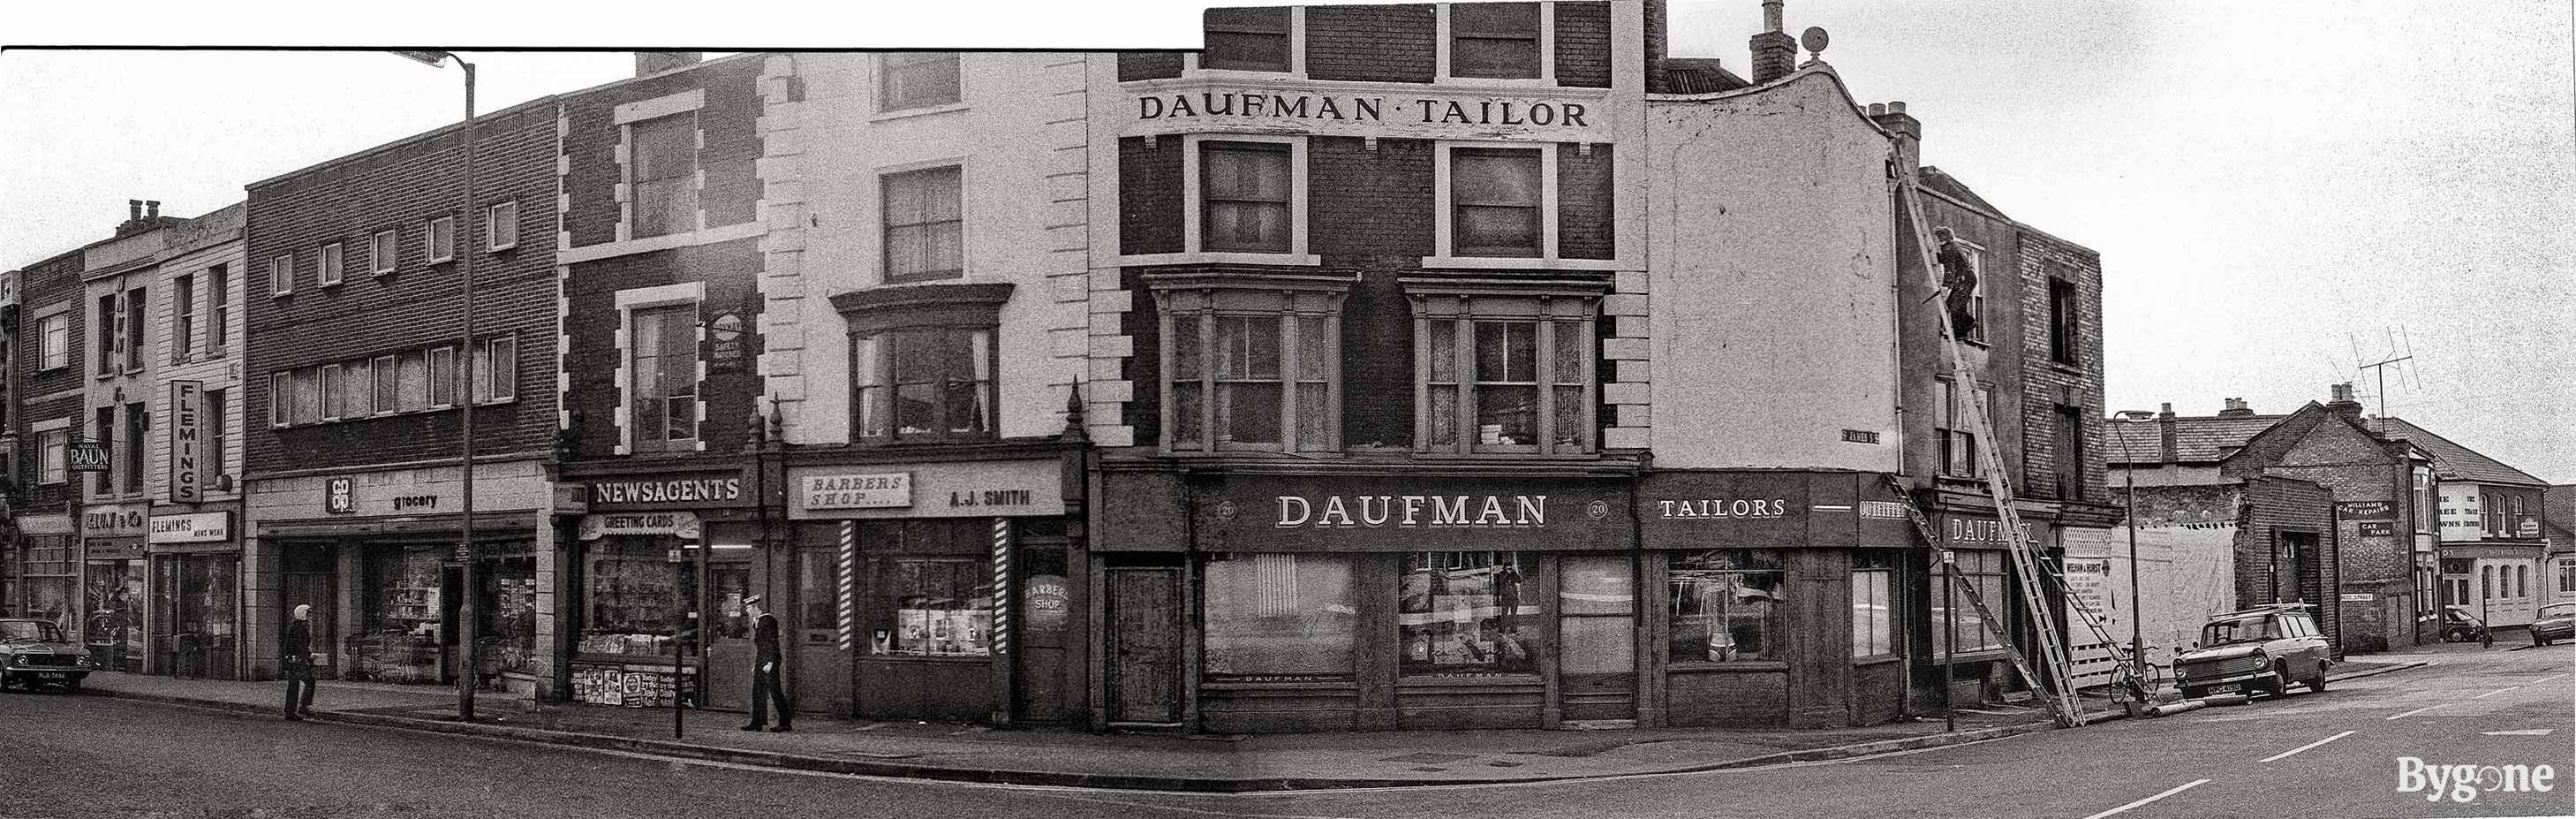 Panorama of a street corner with shops. From left to centre right the shops are, Baun & Co, Flemings, Coop grocery, Newsagents, Barbers Shop A.J. Smith, and Daufman Tailors. To the right there is a man climbing up a tall ladder to the side of Daufman Tailors.